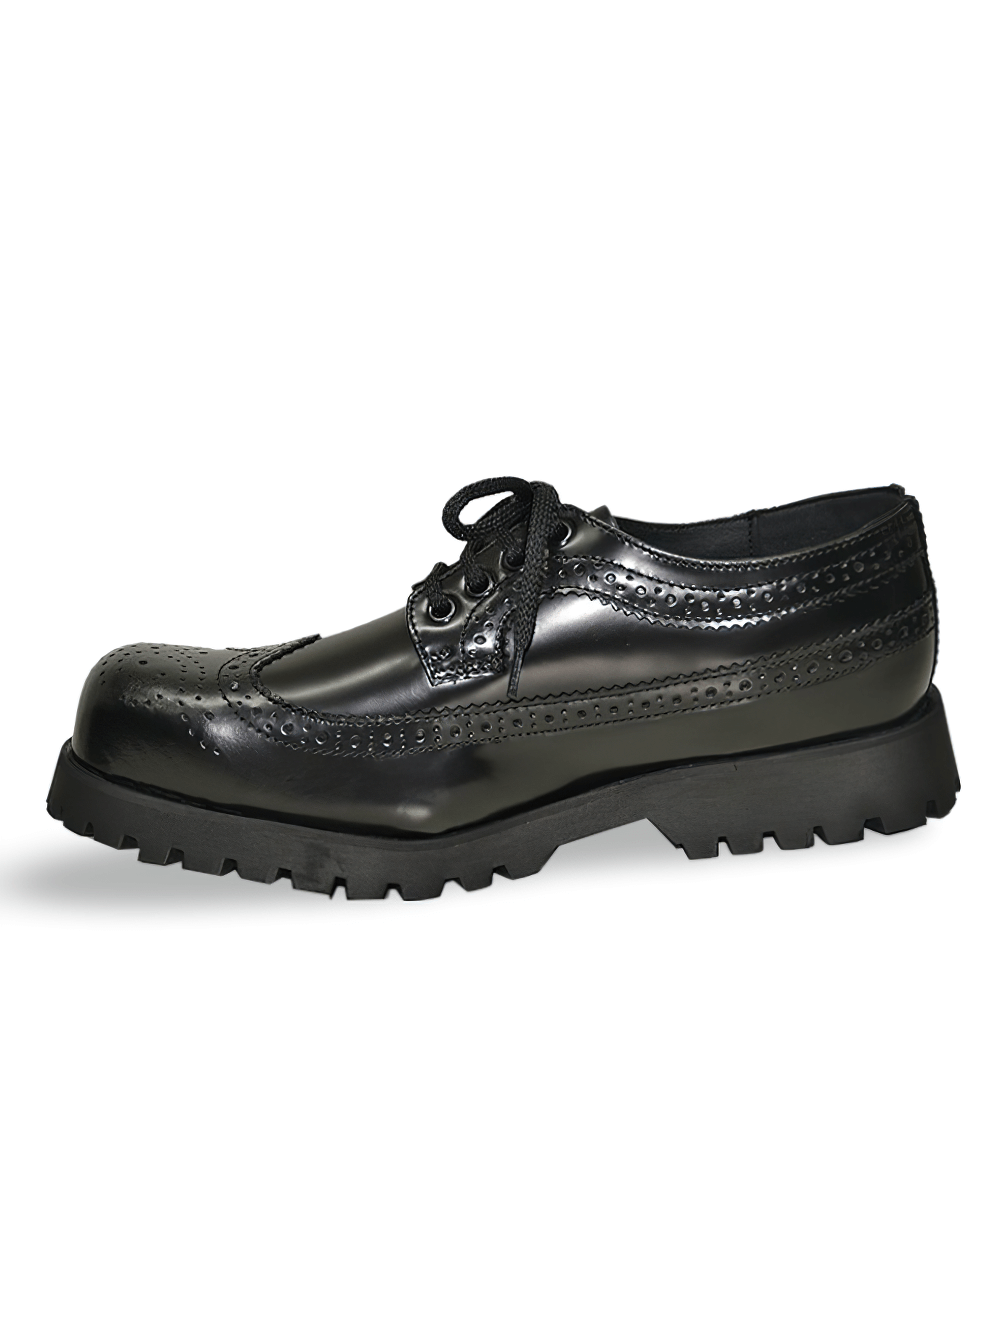 Black Box Leather Rangers Shoes with Steel Toe